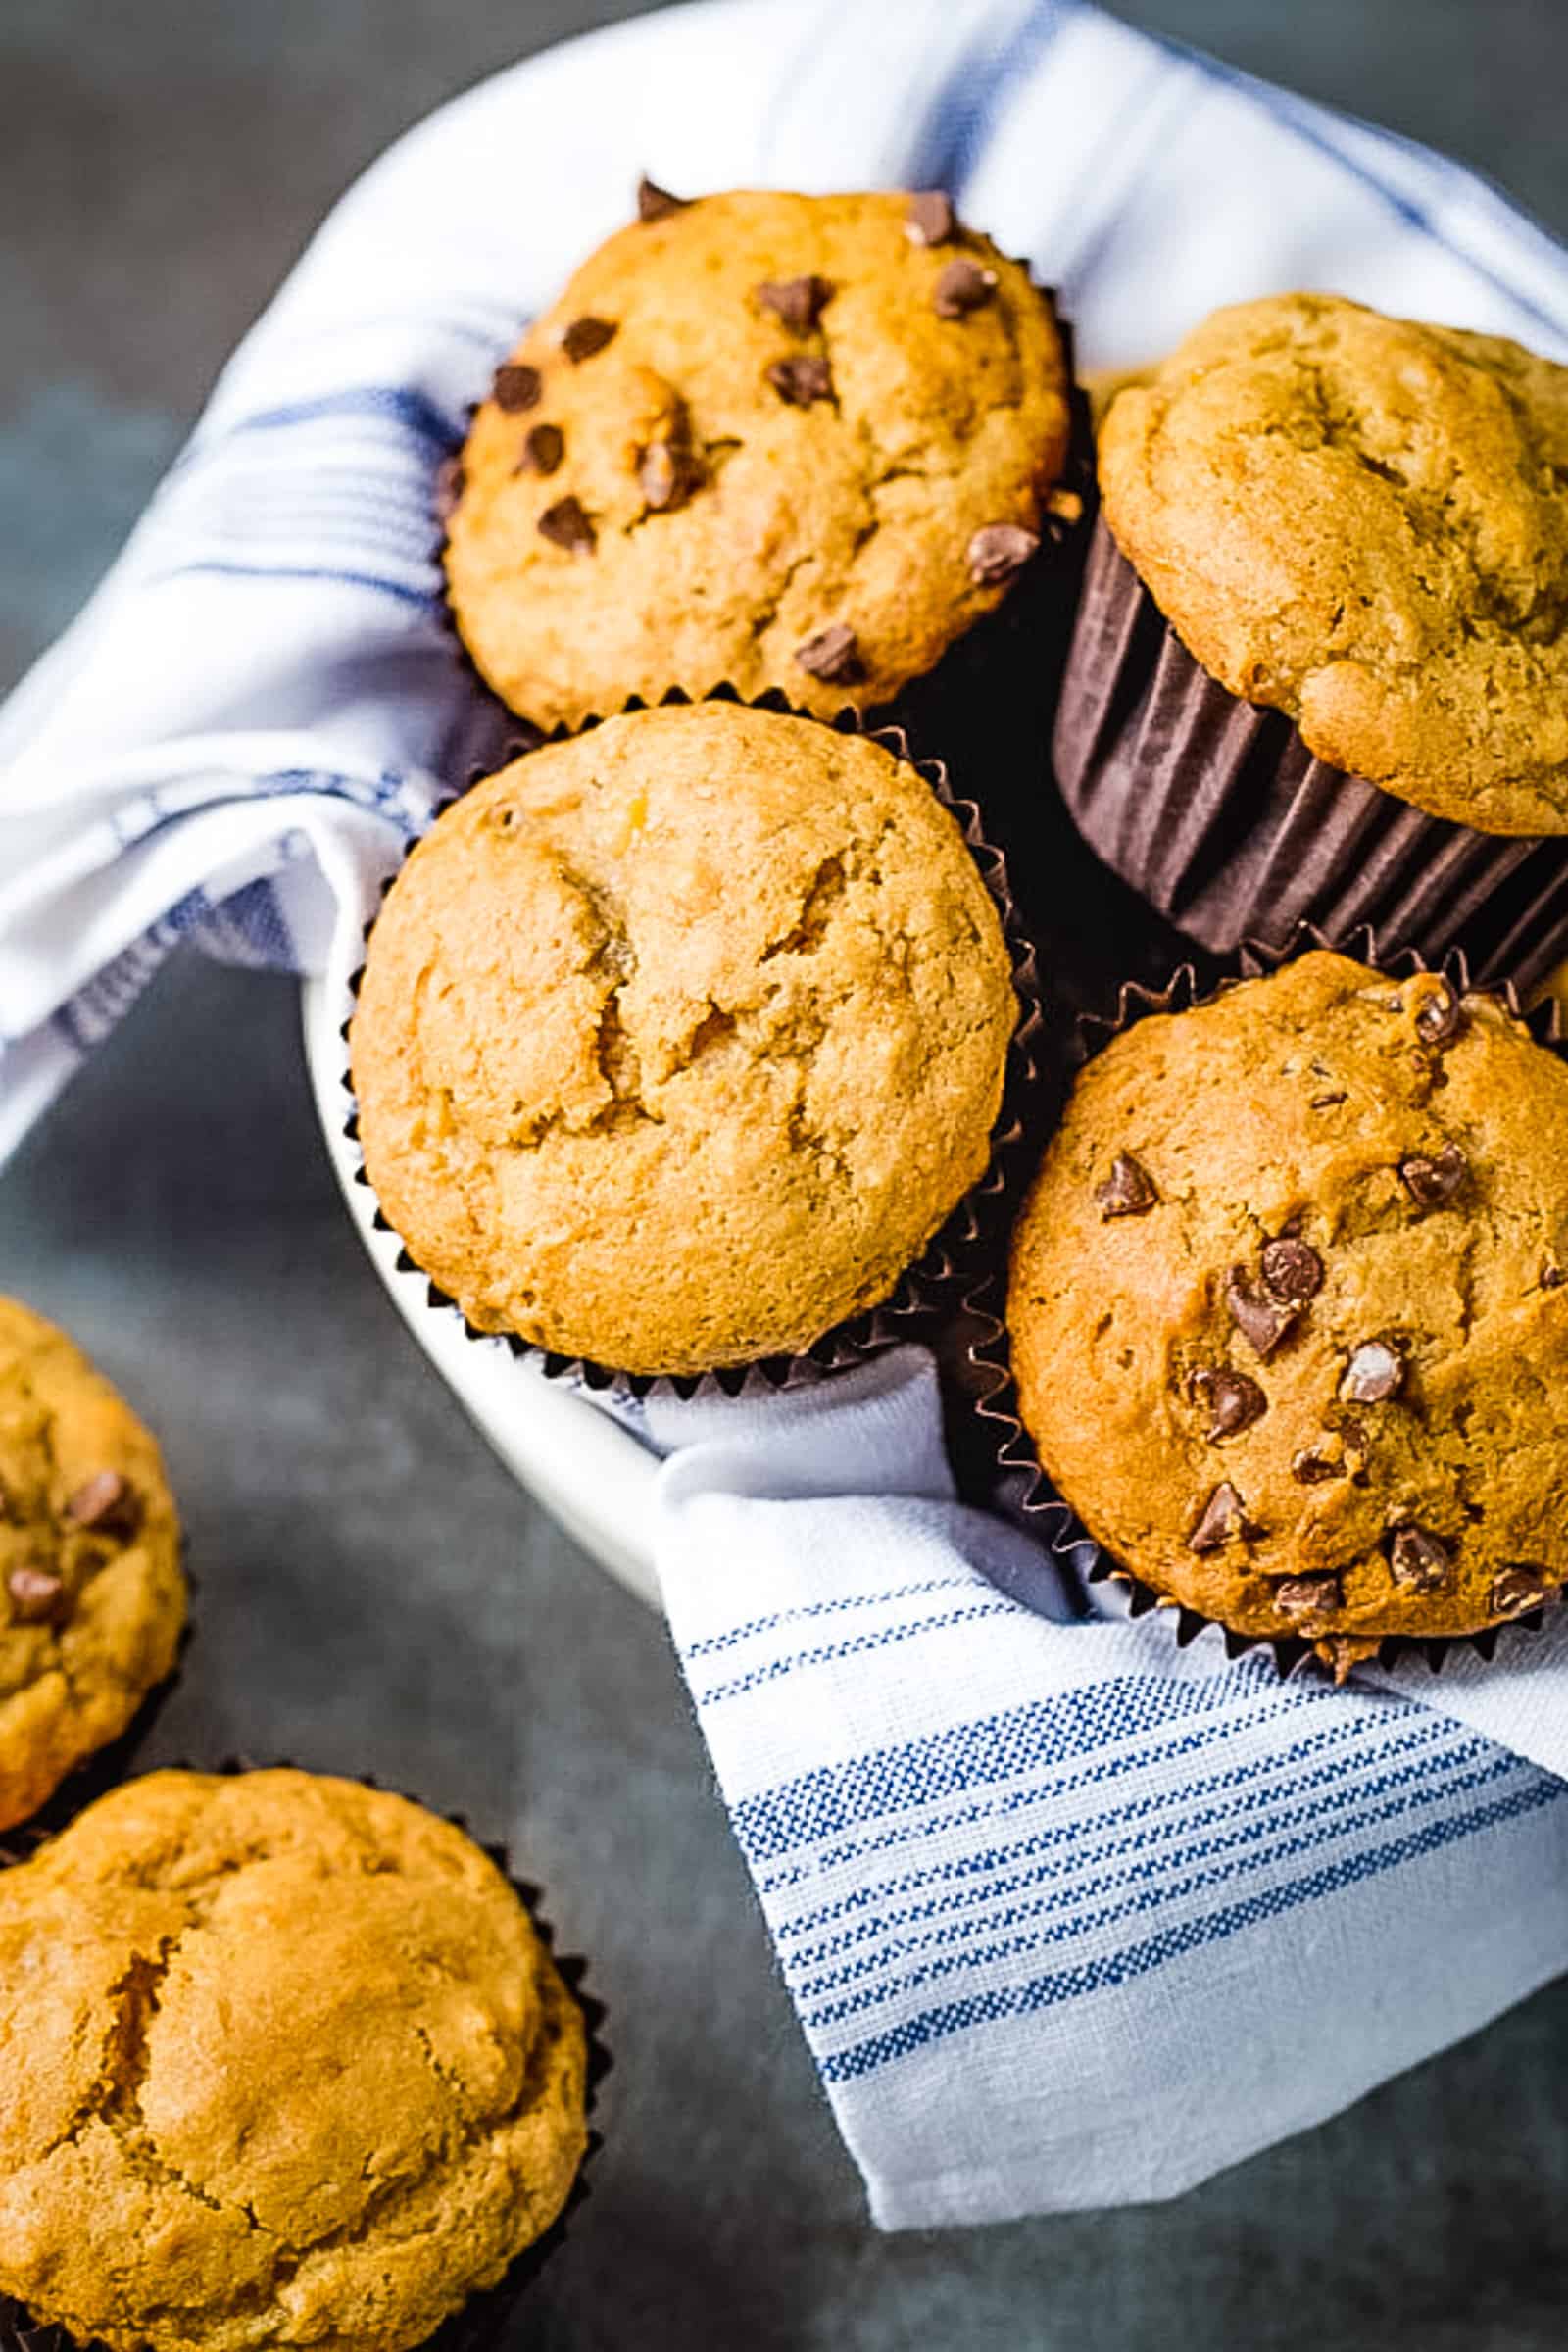 Gluten-Free banana muffins in a towel-lined bowl. Some of the muffins have chocolate chips.